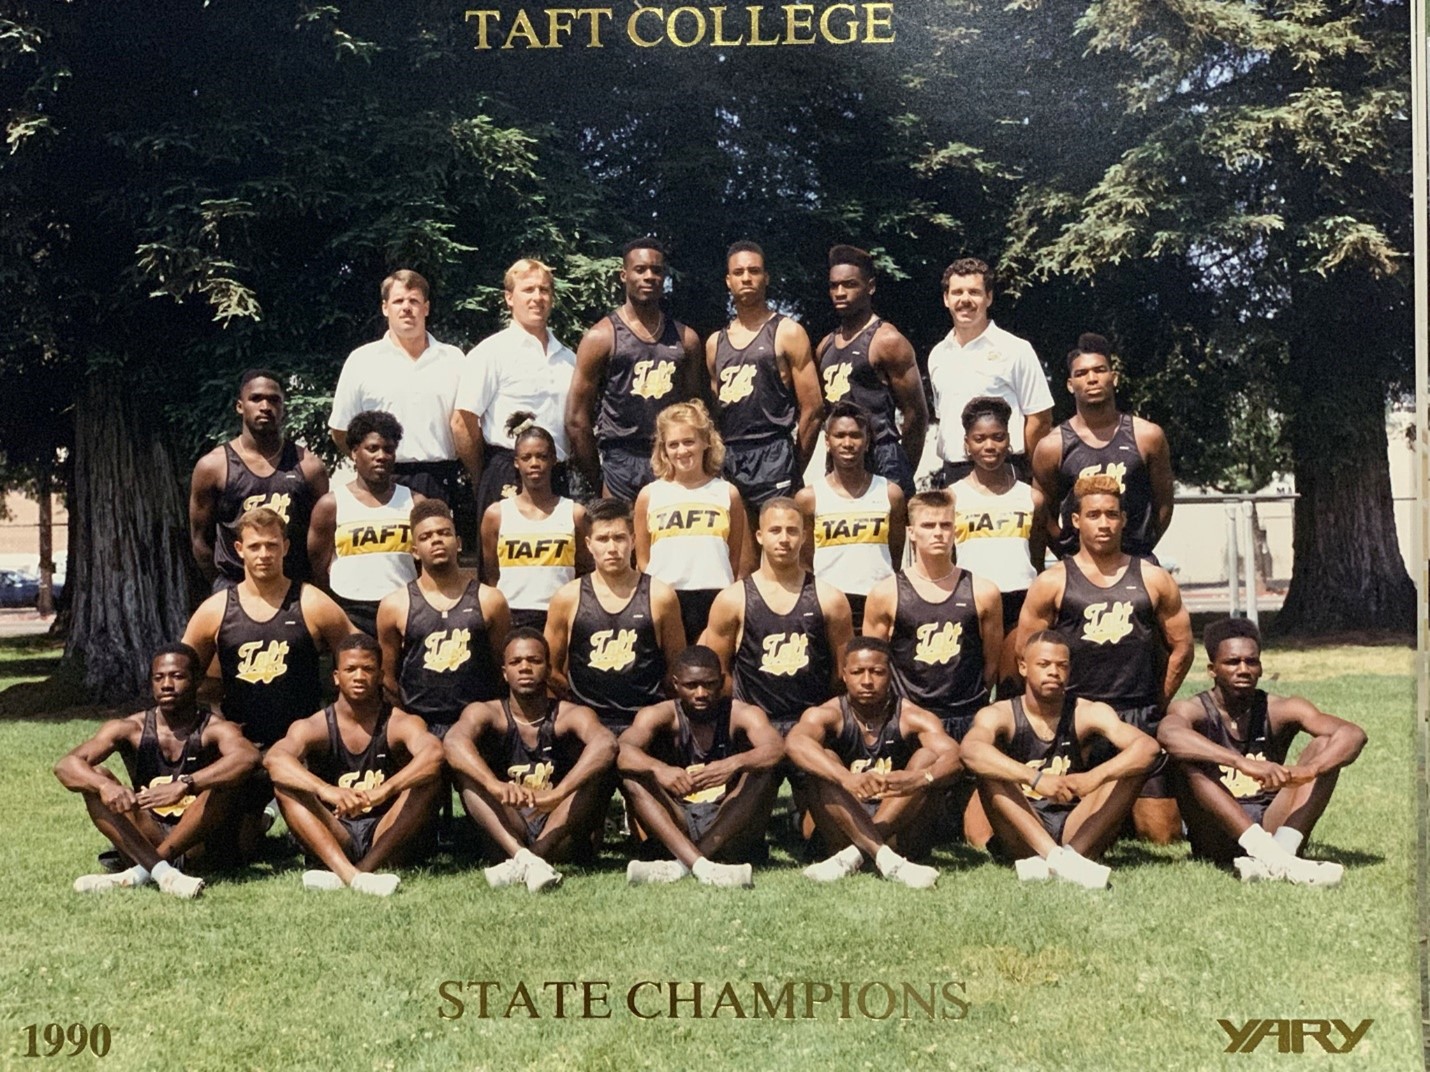 The 1990 State Championship Track Team in 3 rows. Sitting on green grass with large green trees in the background.